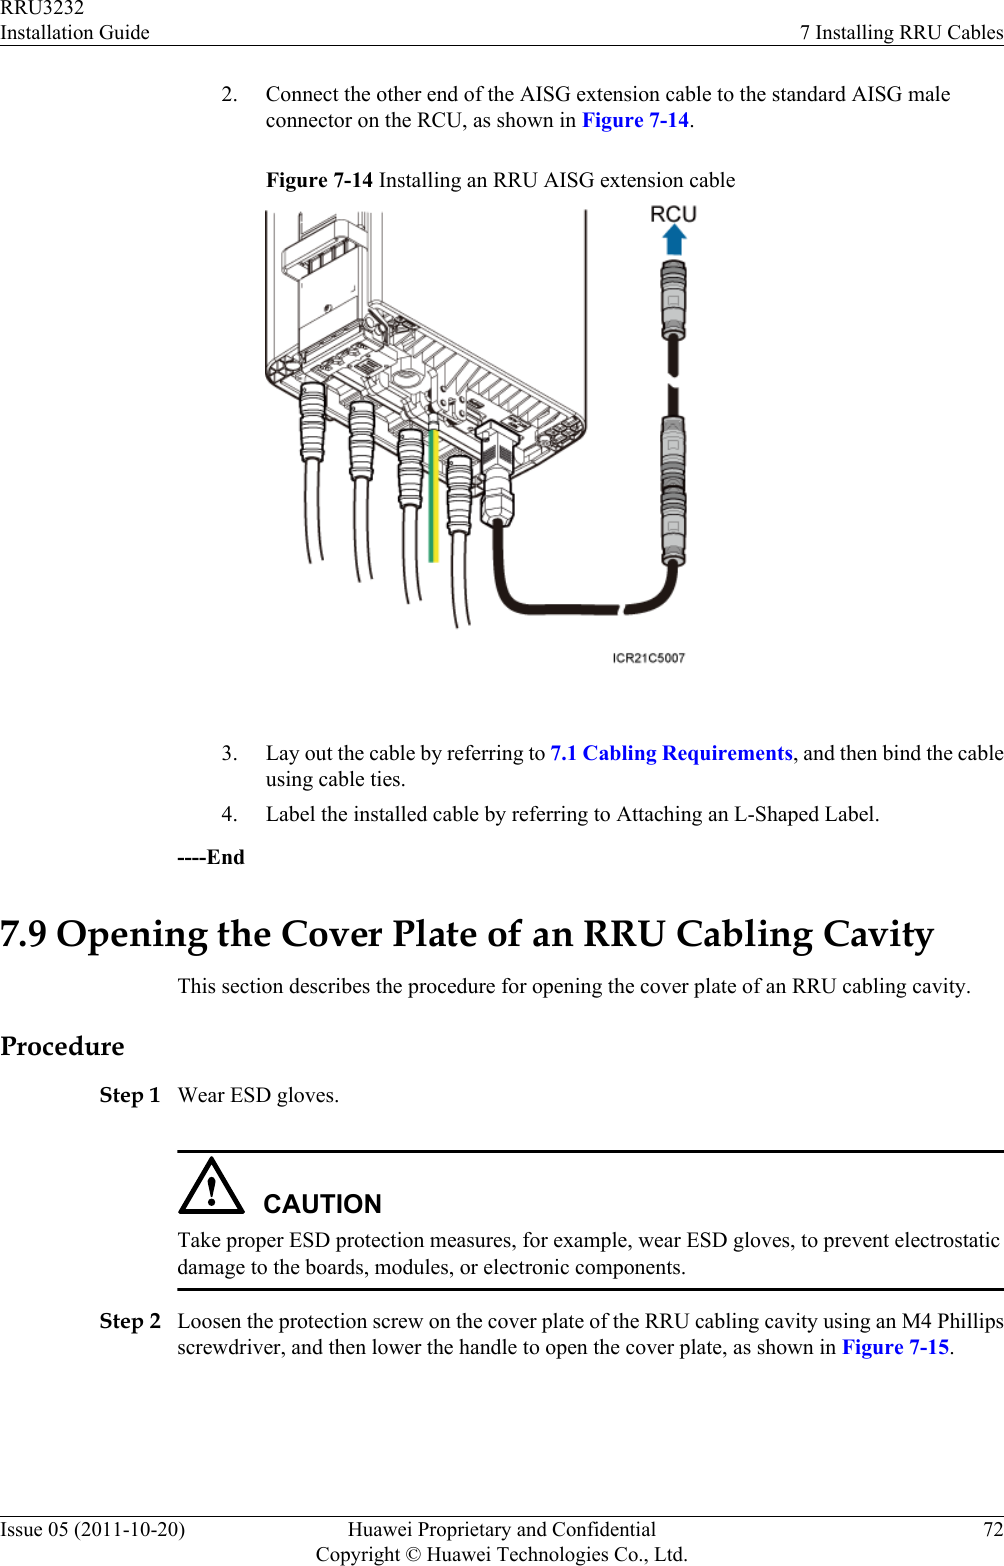 2. Connect the other end of the AISG extension cable to the standard AISG maleconnector on the RCU, as shown in Figure 7-14.Figure 7-14 Installing an RRU AISG extension cable 3. Lay out the cable by referring to 7.1 Cabling Requirements, and then bind the cableusing cable ties.4. Label the installed cable by referring to Attaching an L-Shaped Label.----End7.9 Opening the Cover Plate of an RRU Cabling CavityThis section describes the procedure for opening the cover plate of an RRU cabling cavity.ProcedureStep 1 Wear ESD gloves.CAUTIONTake proper ESD protection measures, for example, wear ESD gloves, to prevent electrostaticdamage to the boards, modules, or electronic components.Step 2 Loosen the protection screw on the cover plate of the RRU cabling cavity using an M4 Phillipsscrewdriver, and then lower the handle to open the cover plate, as shown in Figure 7-15.RRU3232Installation Guide 7 Installing RRU CablesIssue 05 (2011-10-20) Huawei Proprietary and ConfidentialCopyright © Huawei Technologies Co., Ltd.72